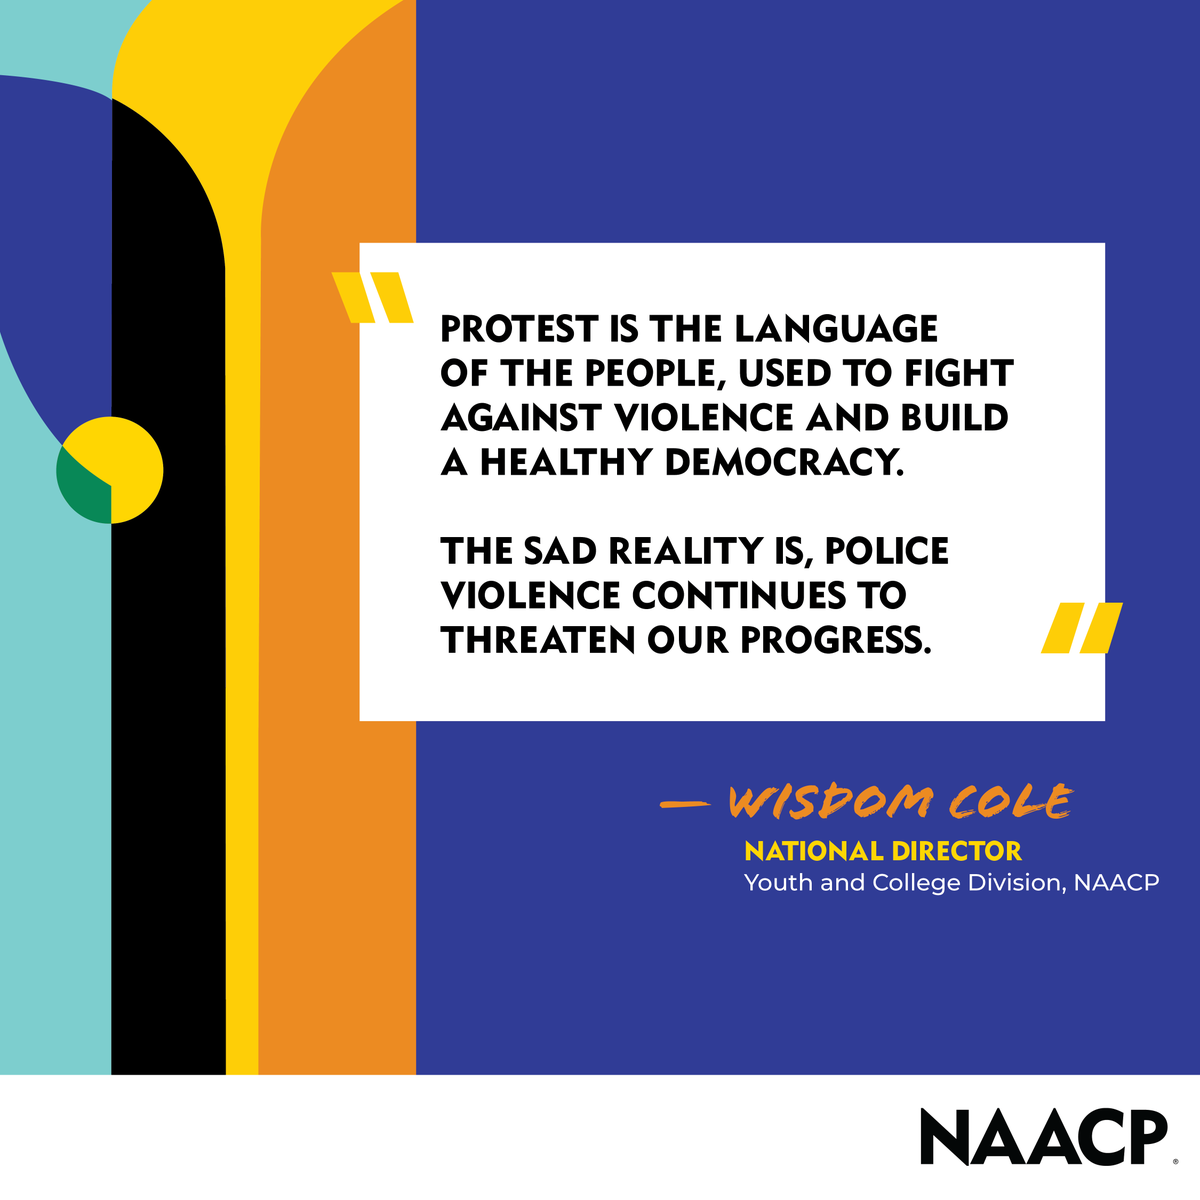 .@wordsofwiz27, National Director of @NAACPYC_, weighs in on the recent reports of excessive police force in response to student activism across the country. Read more: bit.ly/44Be2hq